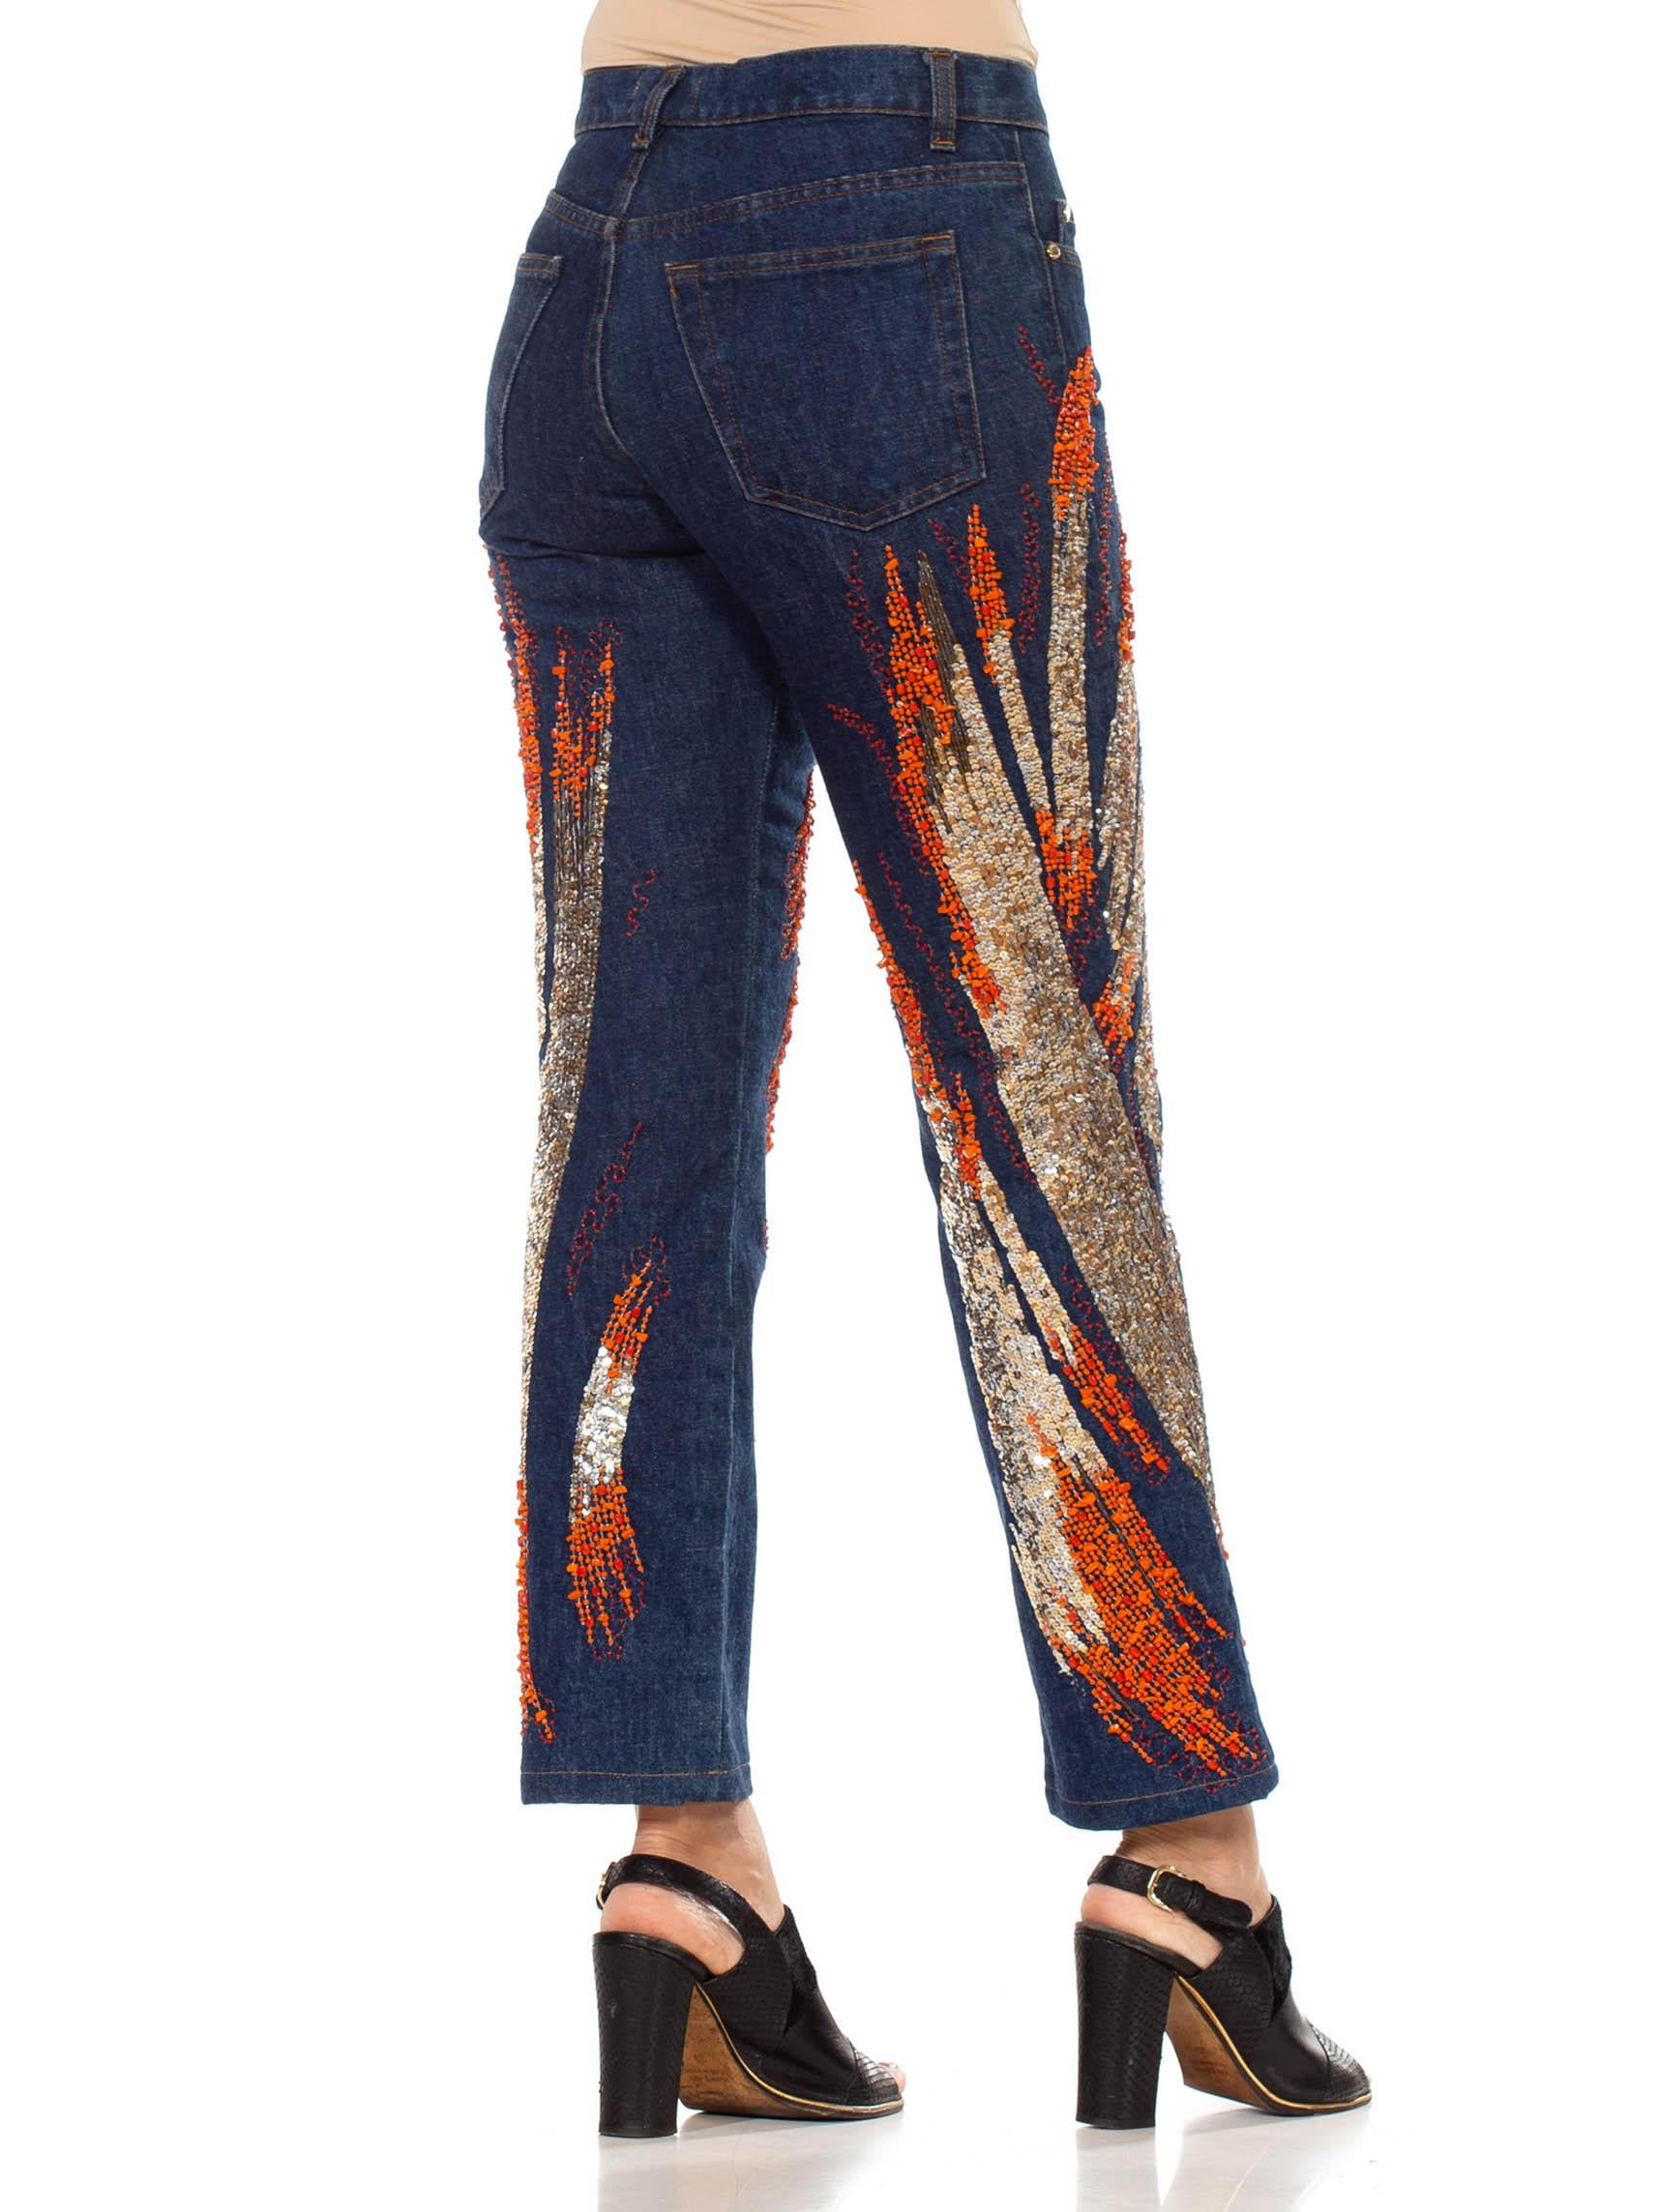 Women's 2000S ROBERTO CAVALLI Blue Cotton Denim Jeans With Orange And Gold Beaded Firew For Sale